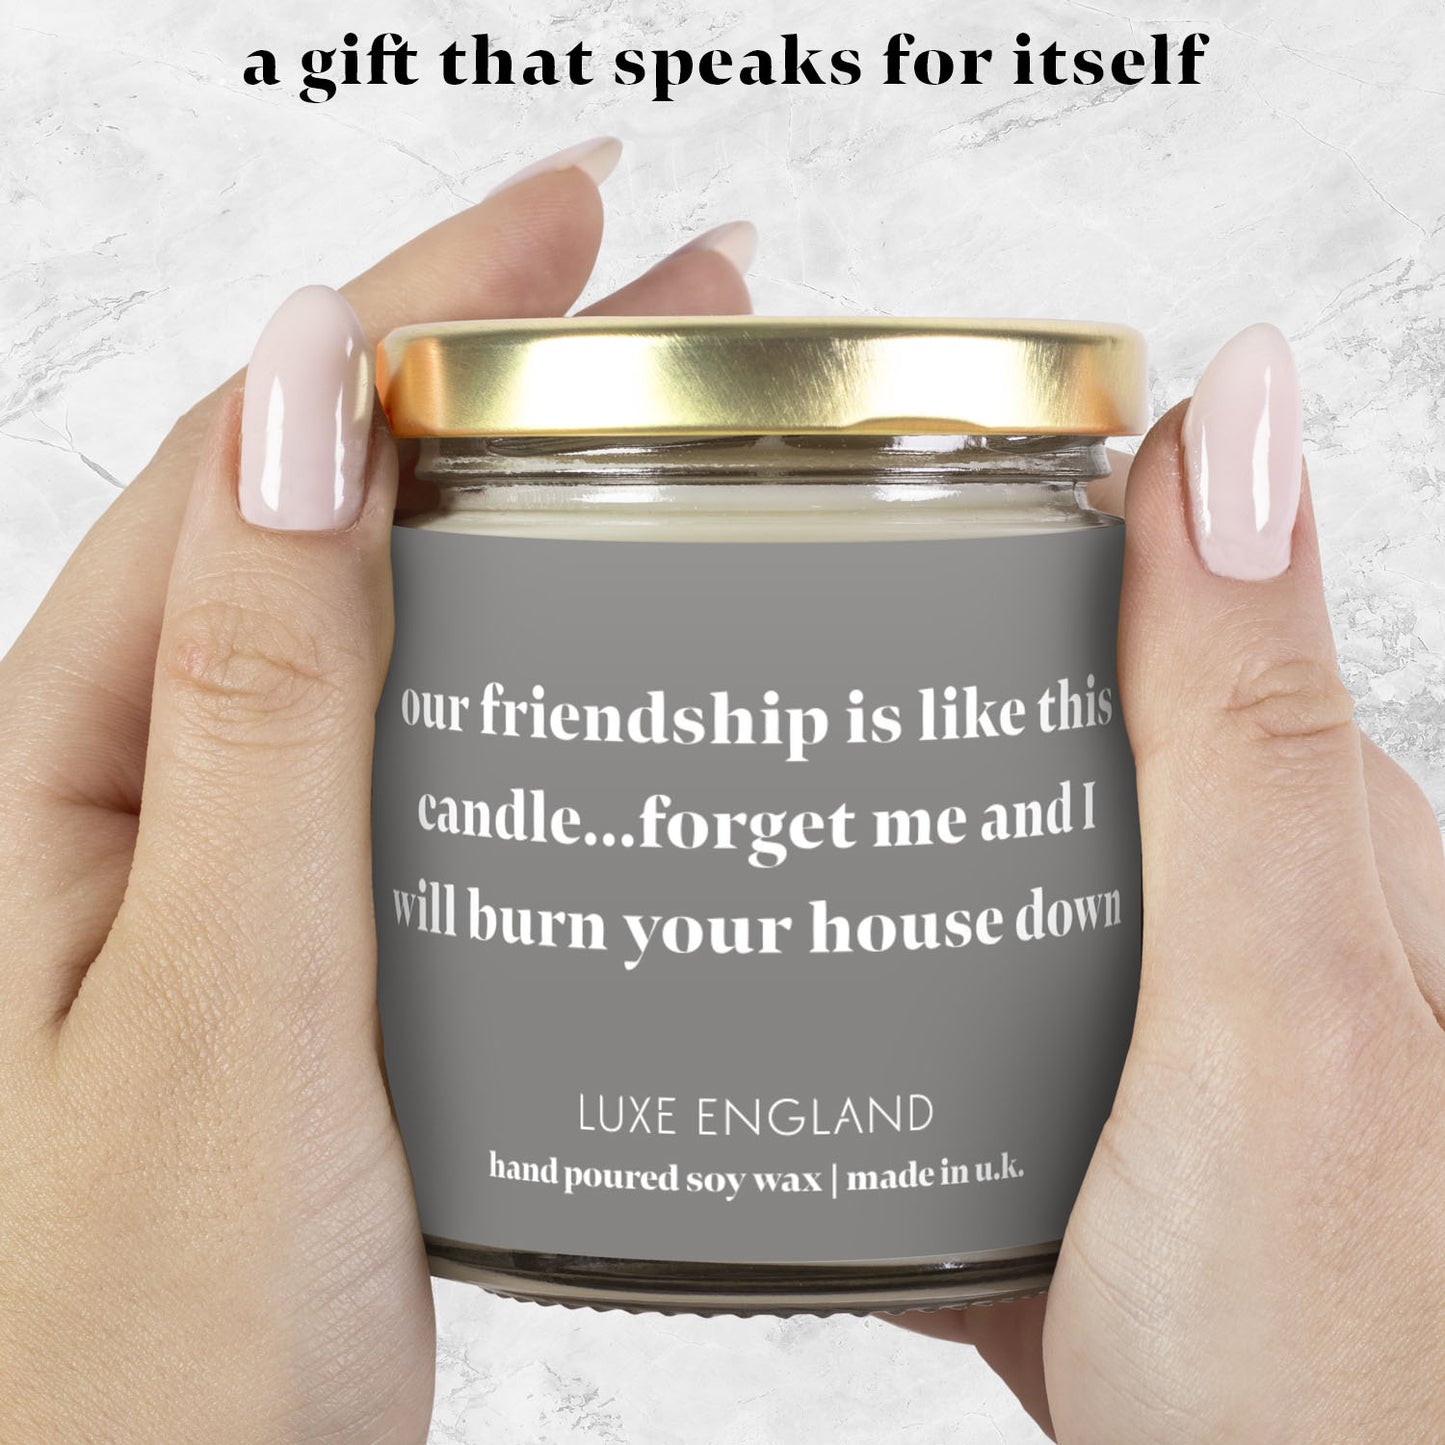 Message Candle (our friendship is like this candle)